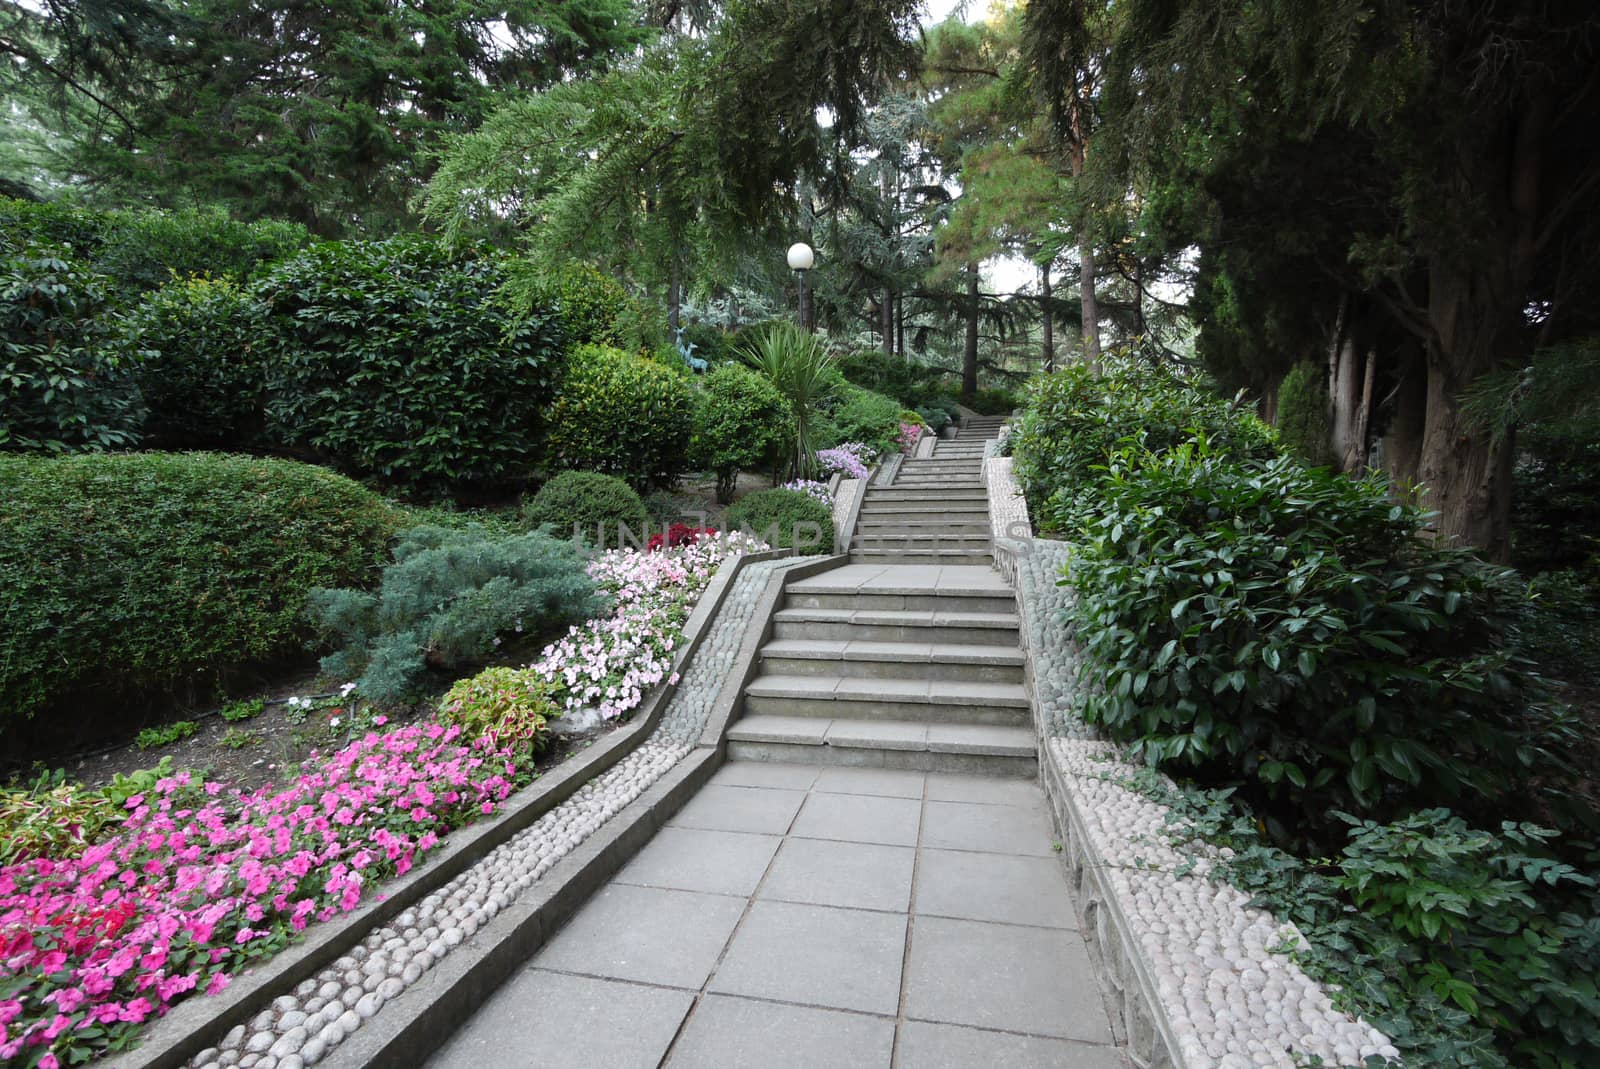 stairs in the park on a background of flowers and bushes